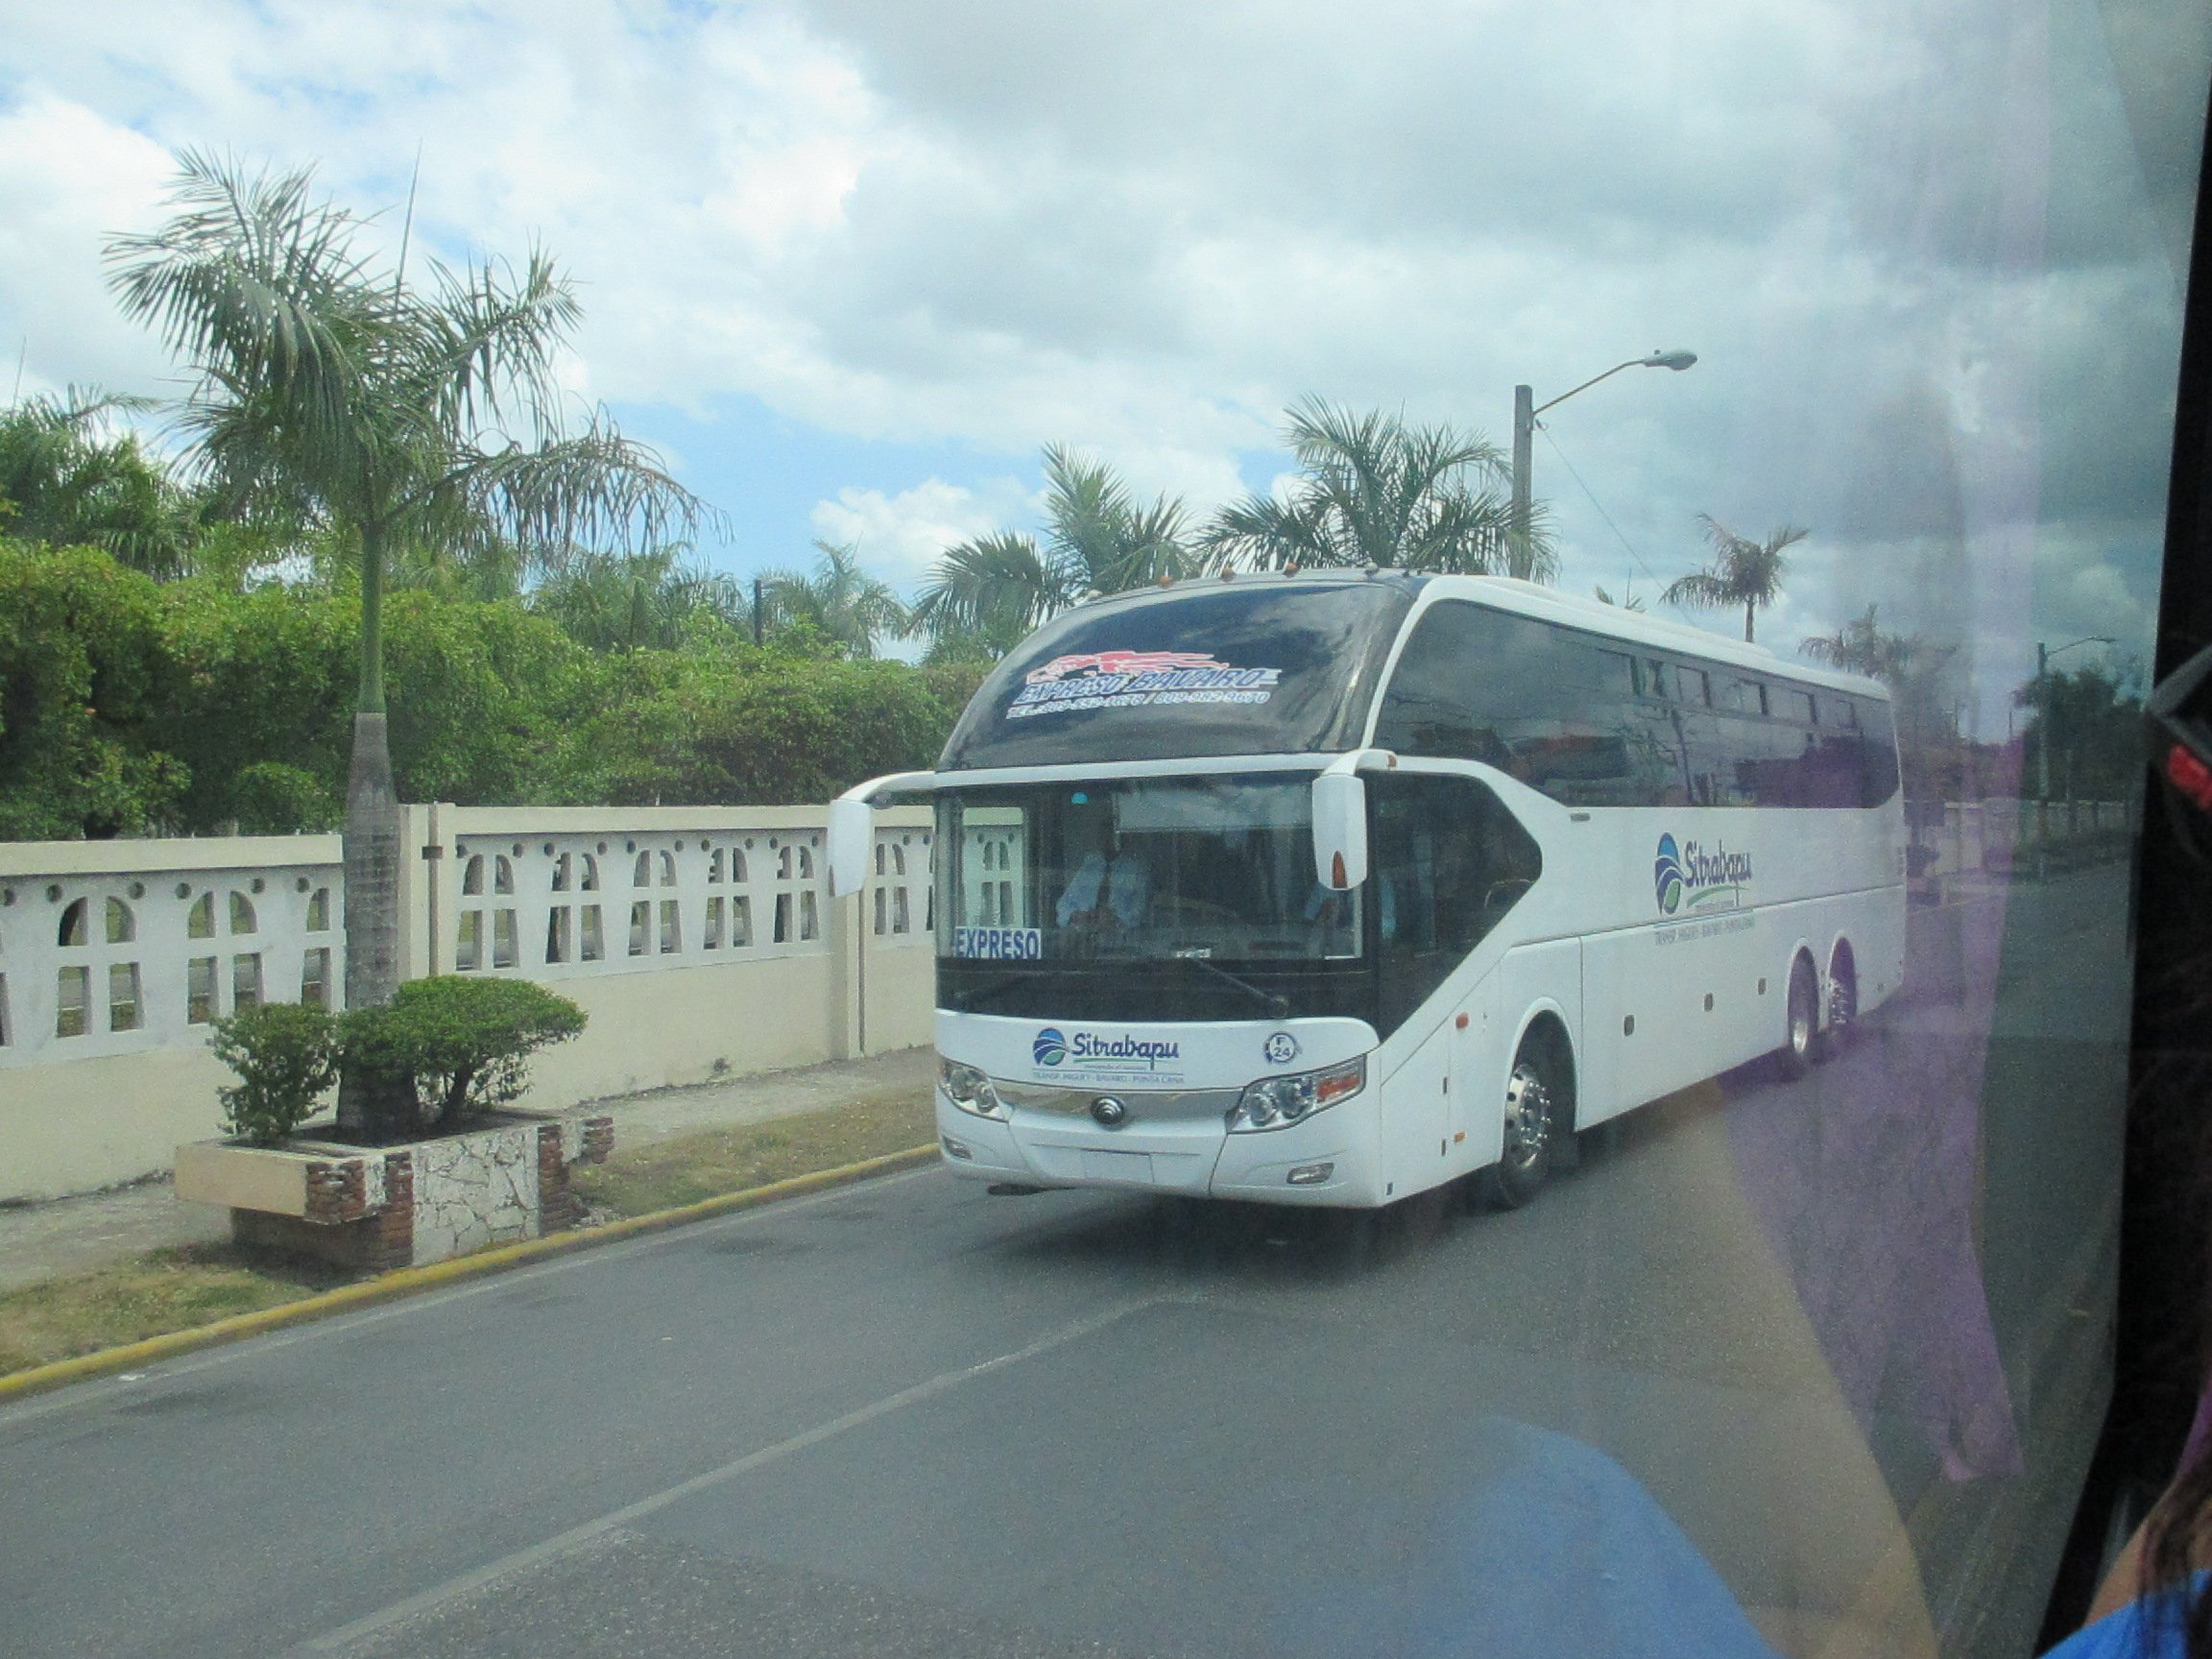 How To Get From Punta Cana Airport to Las Terrenas - All Possible Ways, cheapest way from Punta Cana to Las Terrenas, Punta Cana to Las Terrenas, Punta Cana to Las Terrenas bus, Punta Cana airport to Las Terrenas